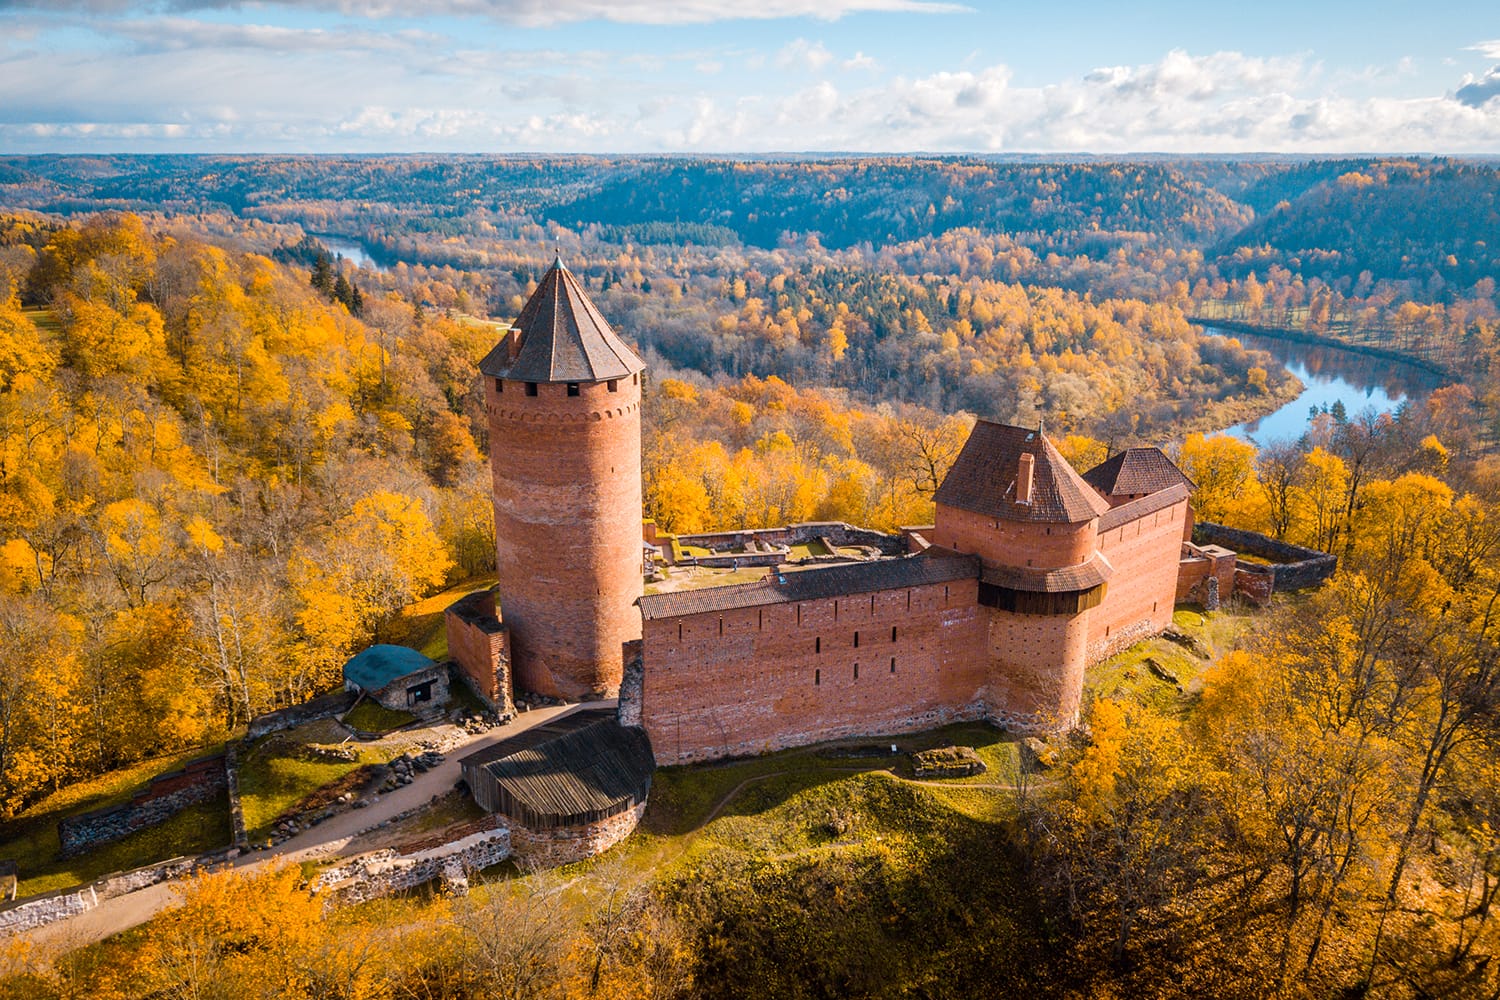 Amazing Aerial View over the Turaida Castle during Golden Hours, Sunset Time, Sigulda, Latvia